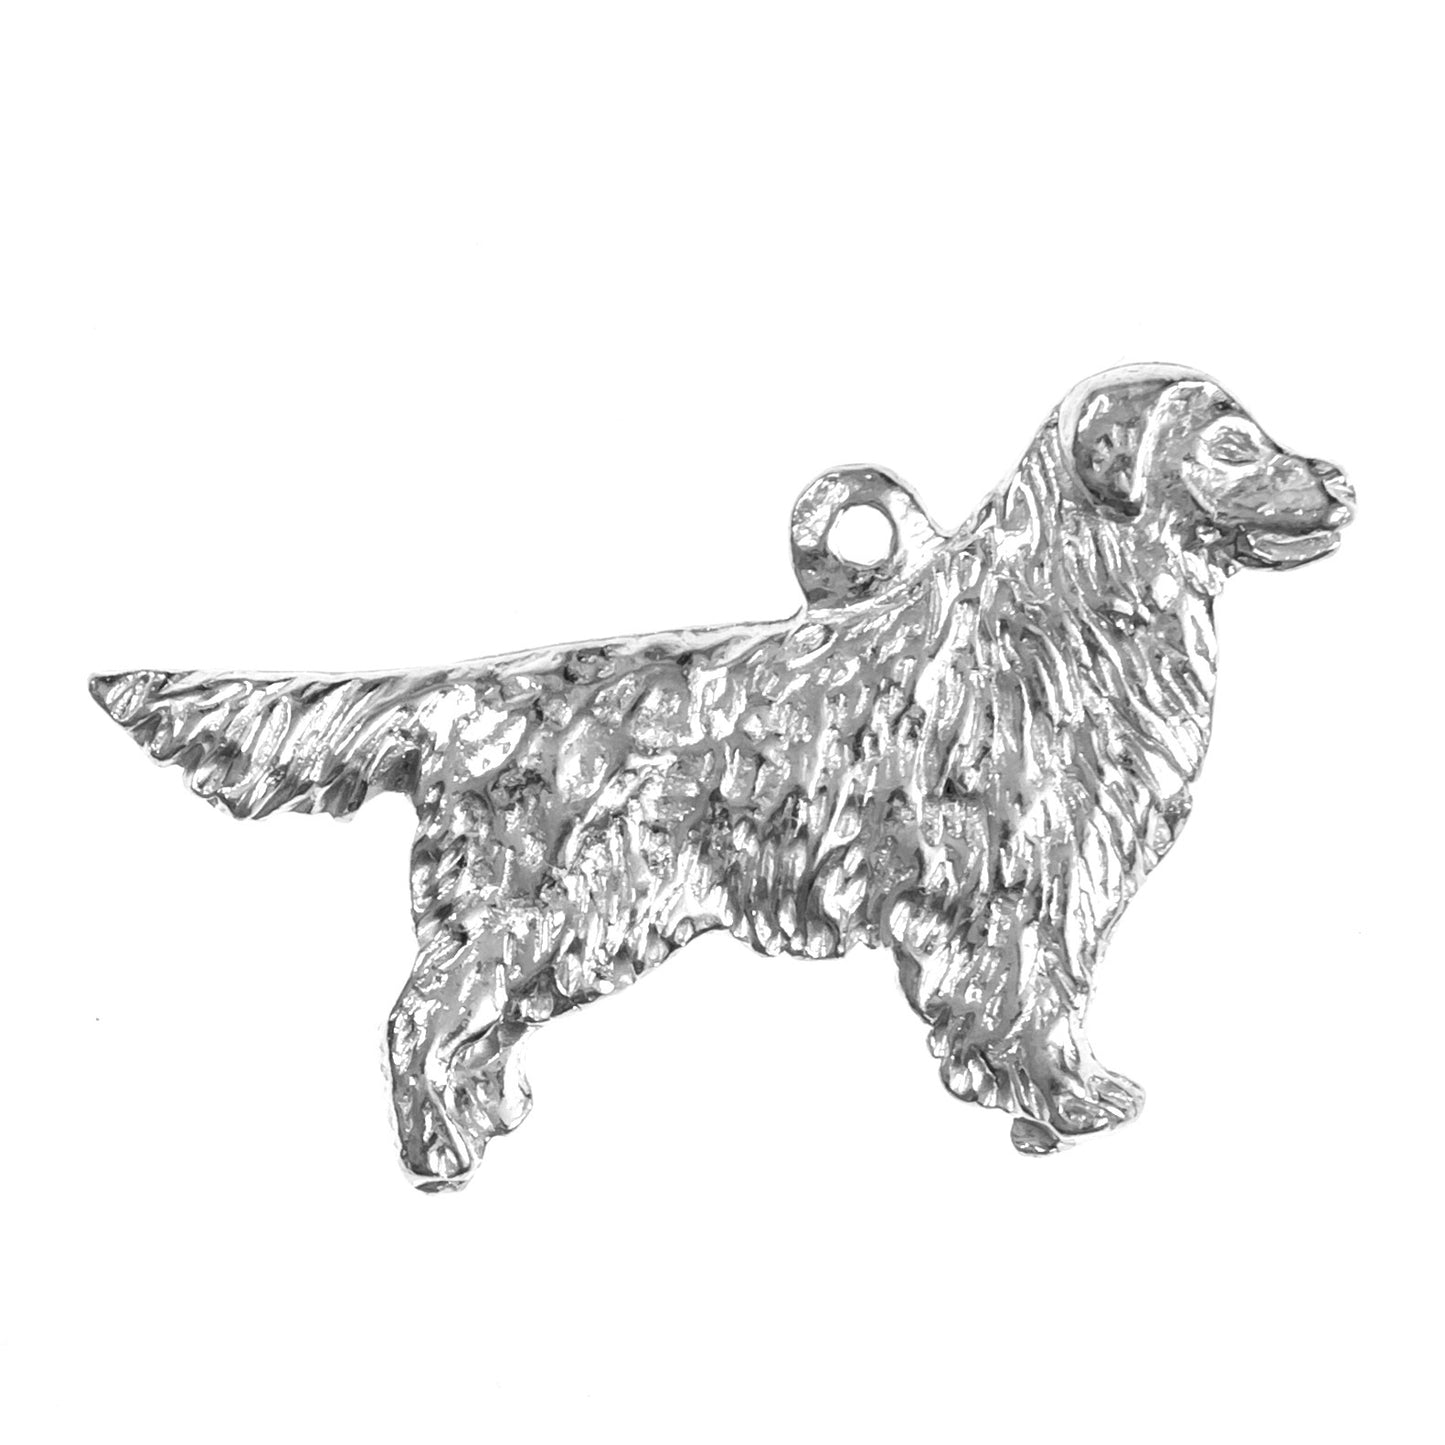 Dog Gifts - Dog Charms - Dog Necklaces - Multiple Dog Breeds and Necklace Options